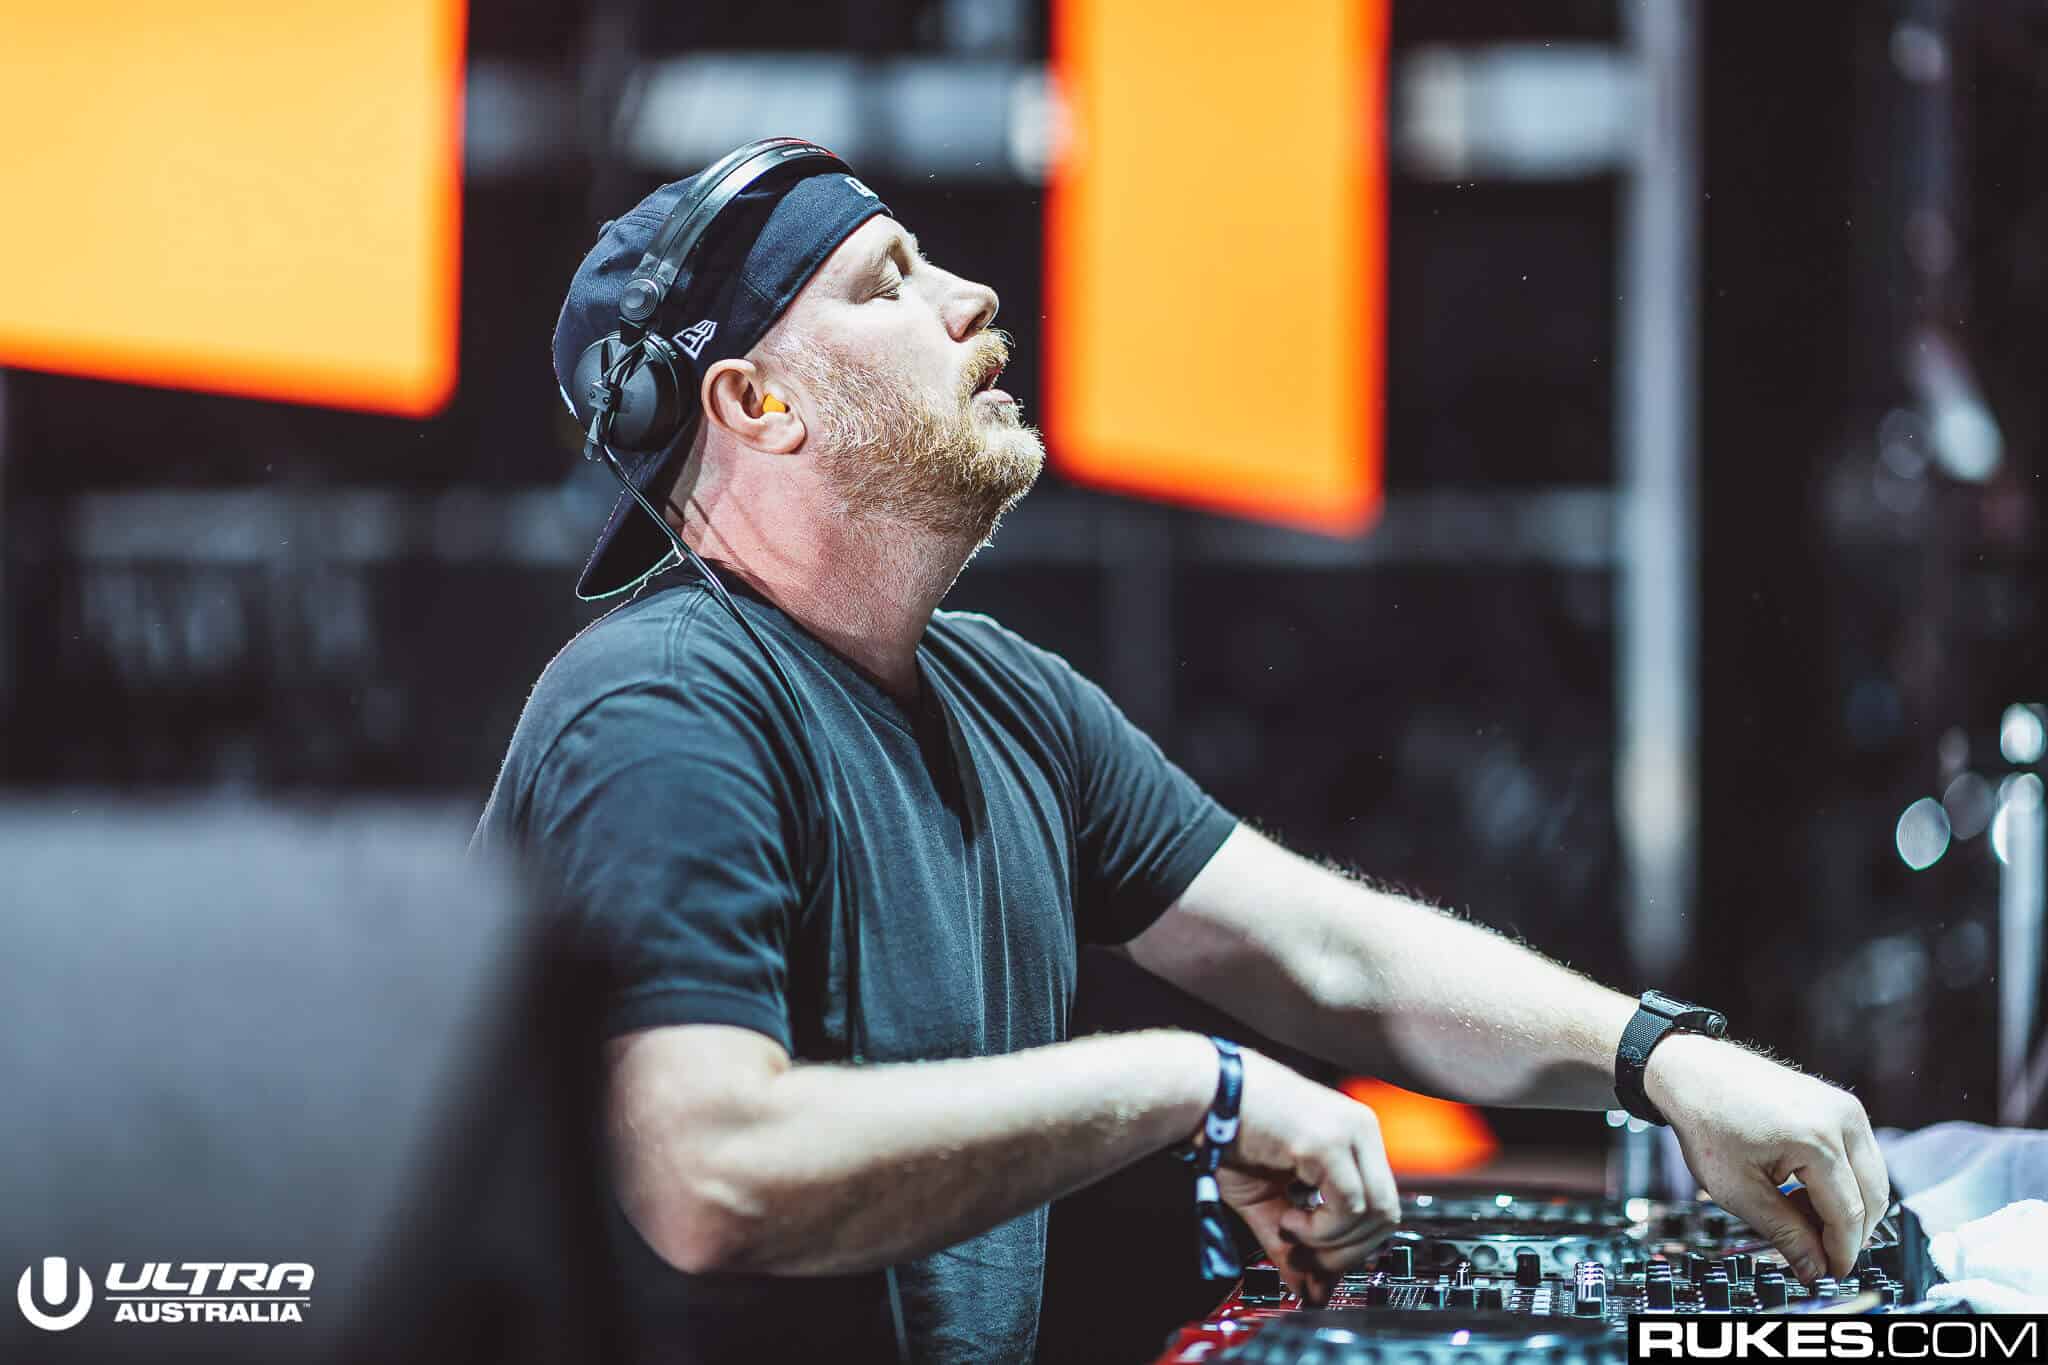 Eric Prydz presents ‘The Return’ of Pryda with the first release in five years: Listen